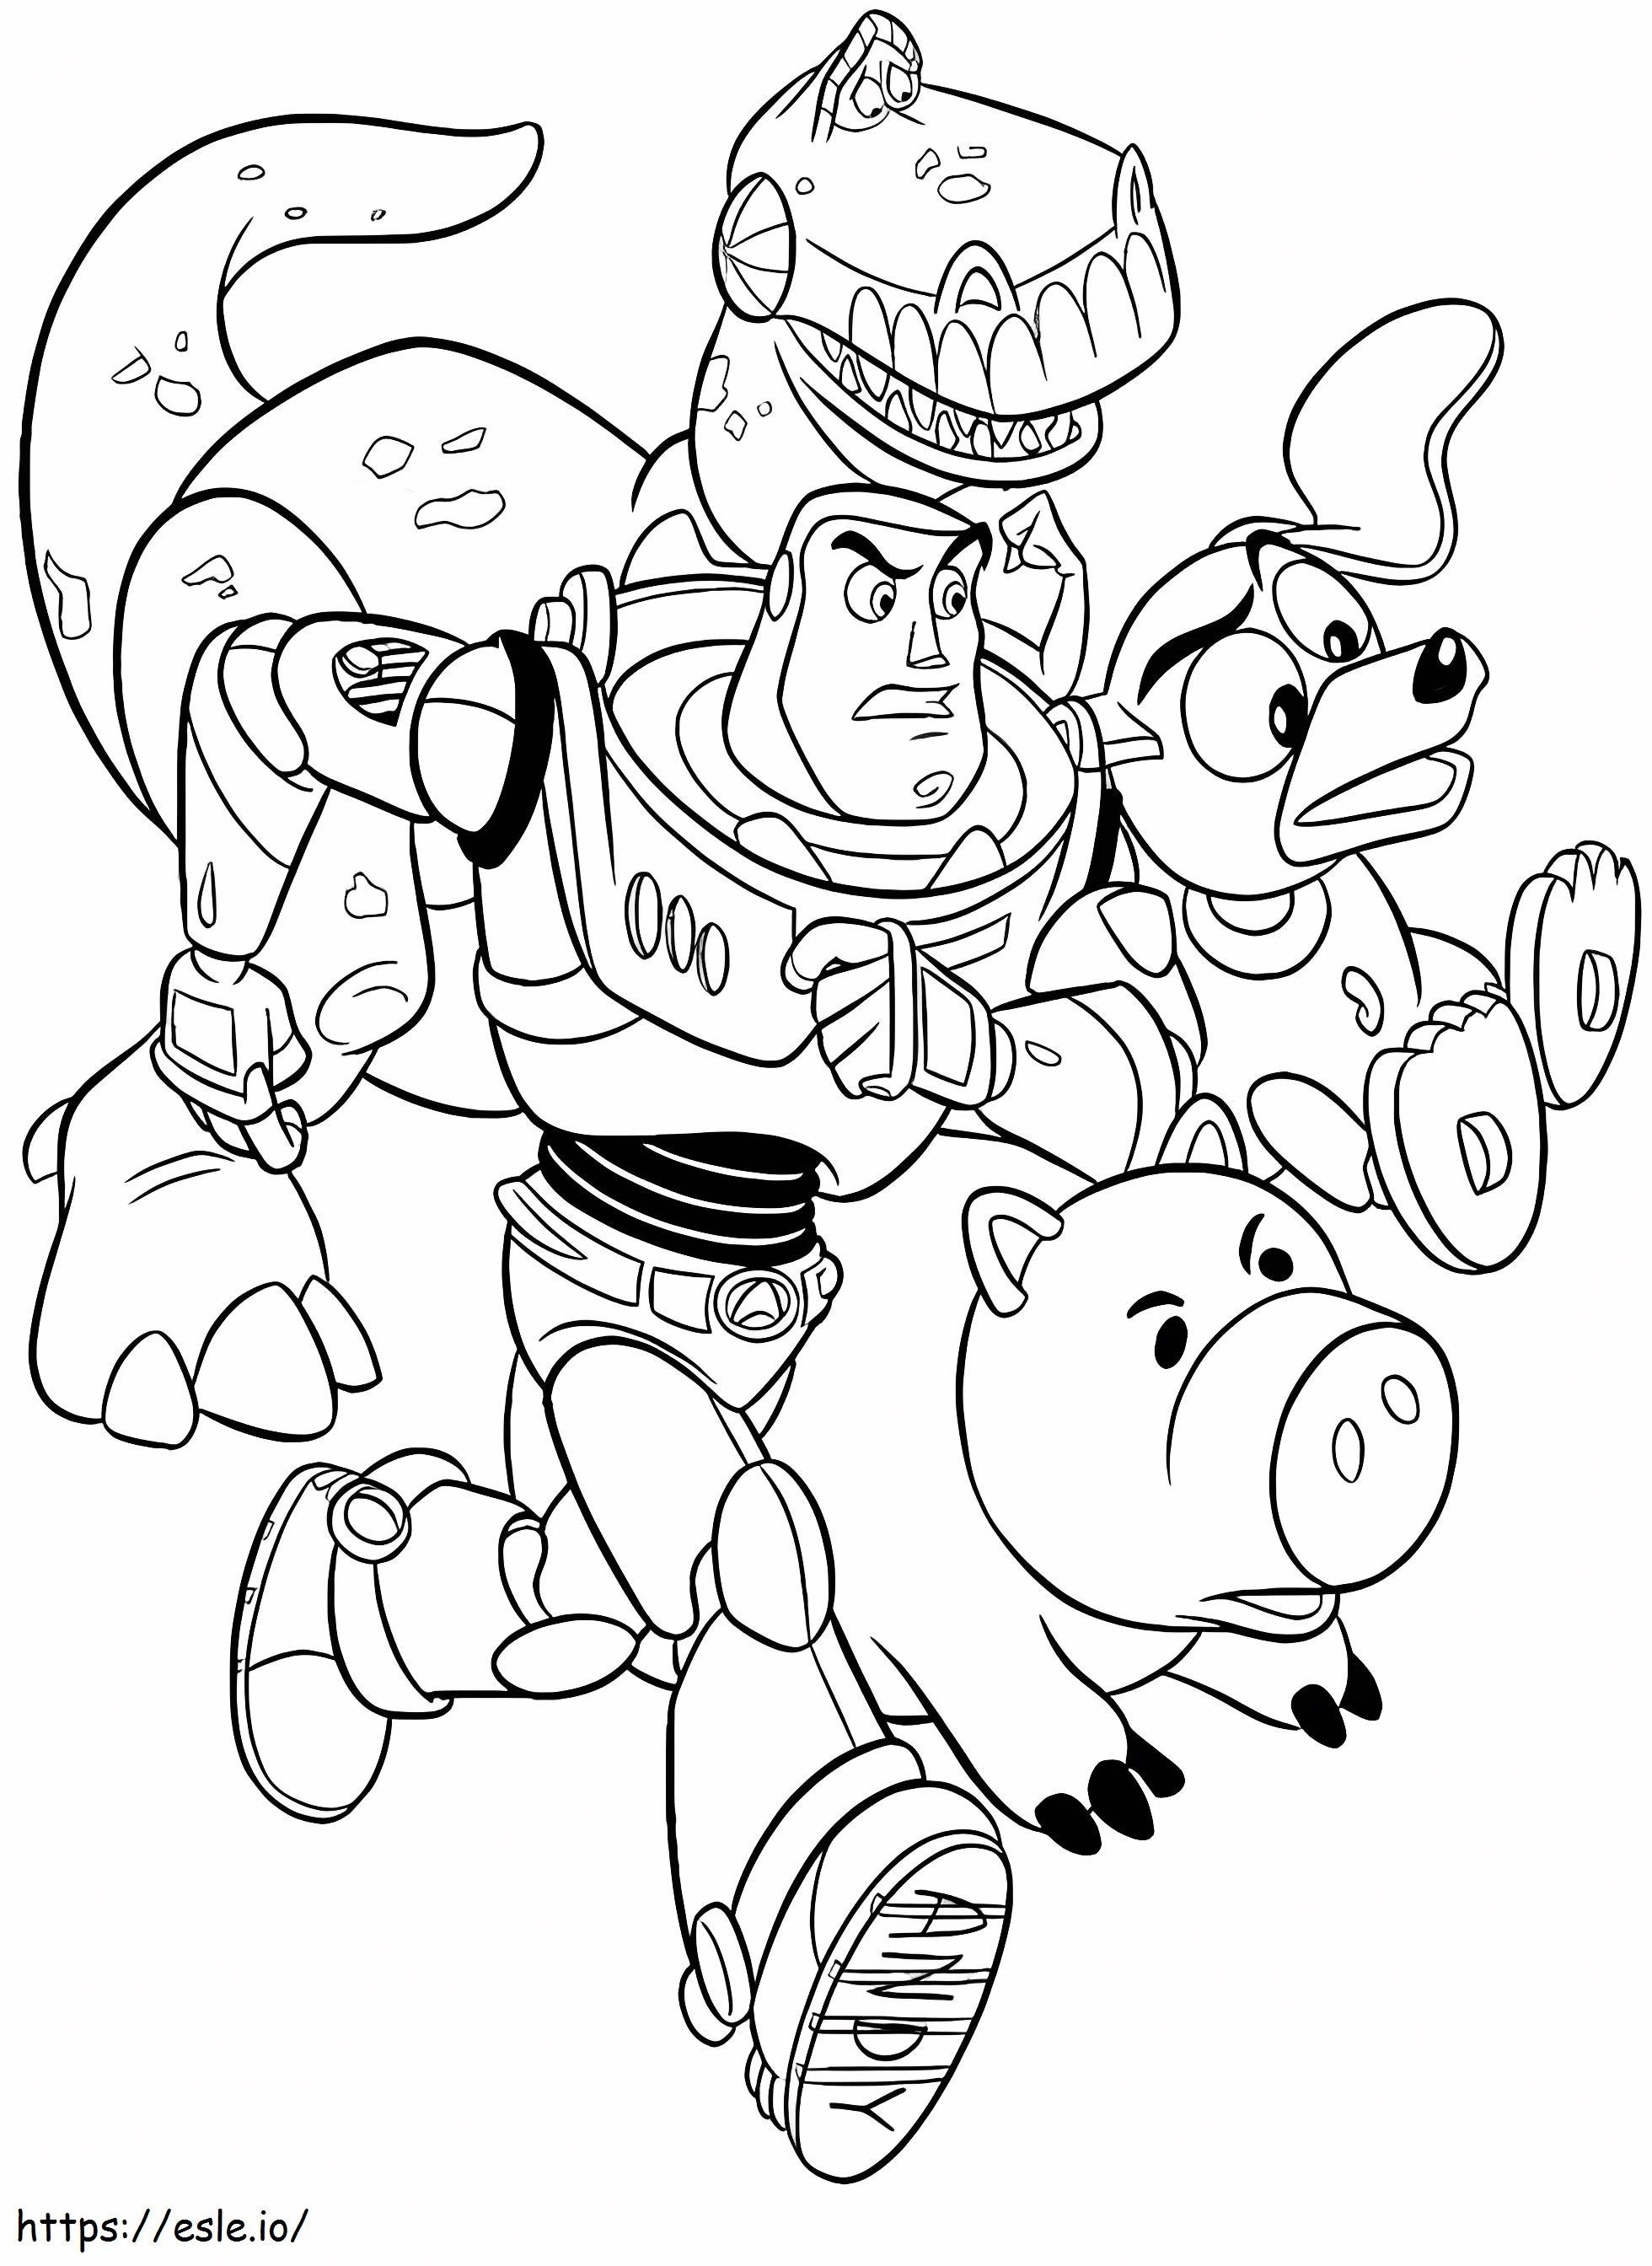 1559875292 The Toys Are Running A4 coloring page